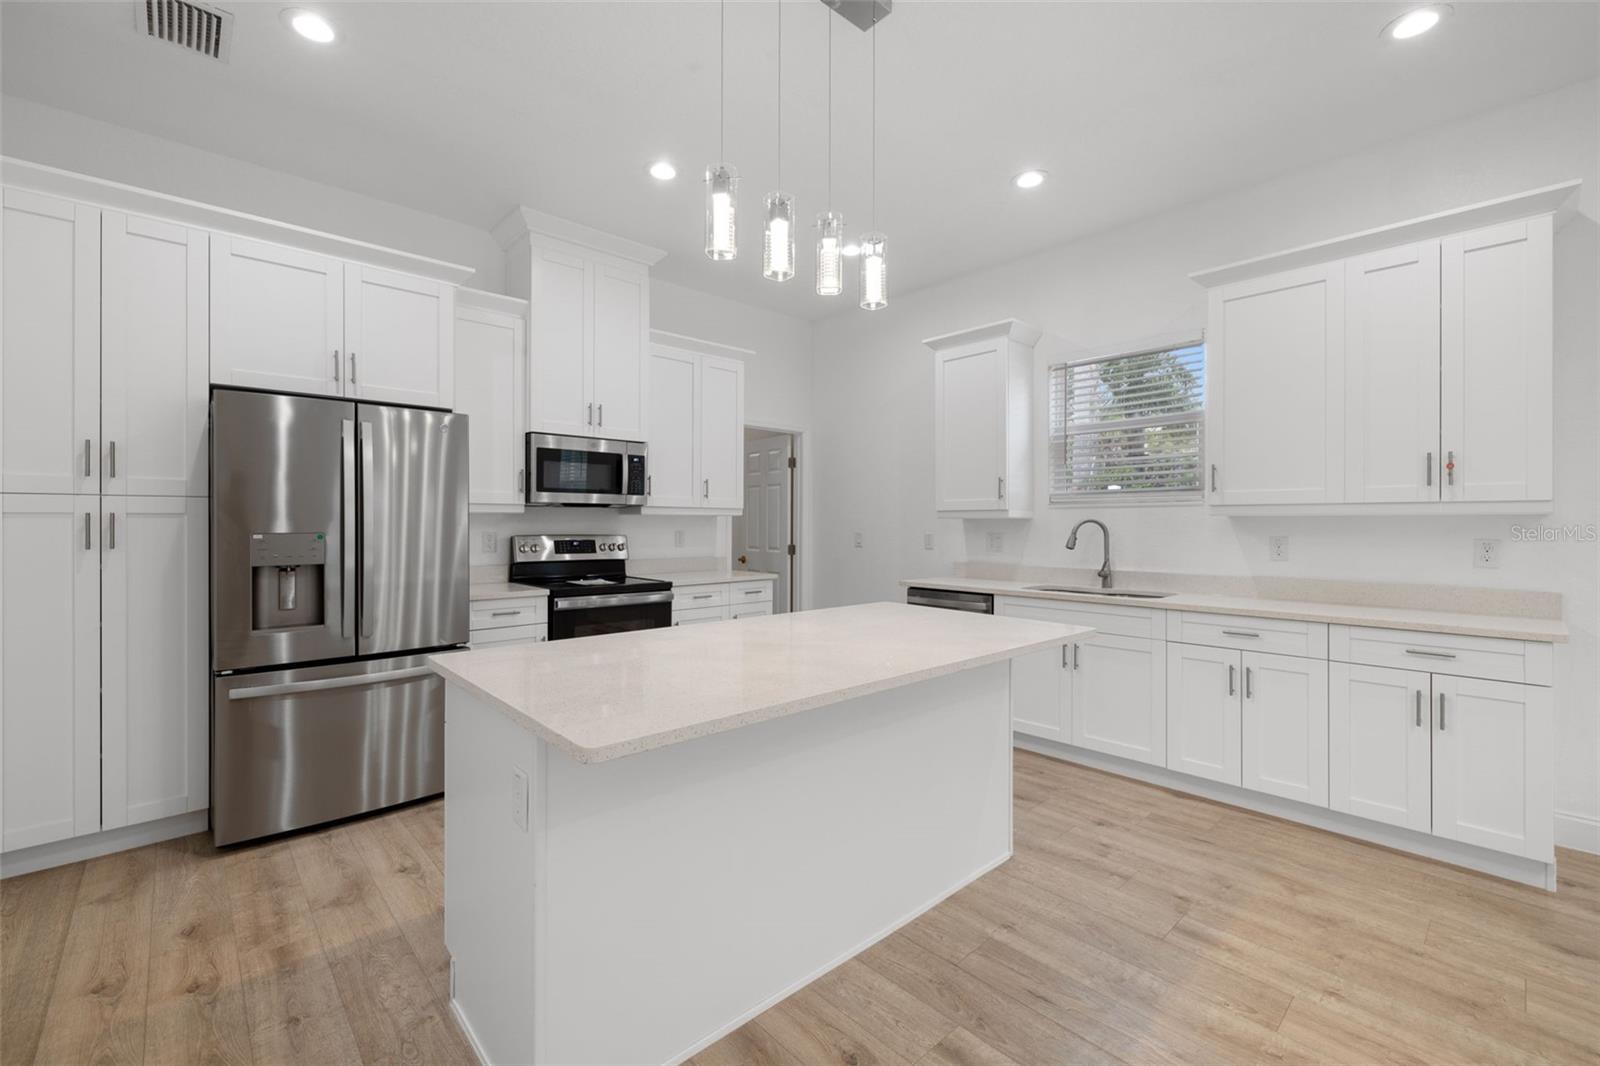 Kitchen with new appliances, pantry, soft close cabinets w sparkling Quartz countertops